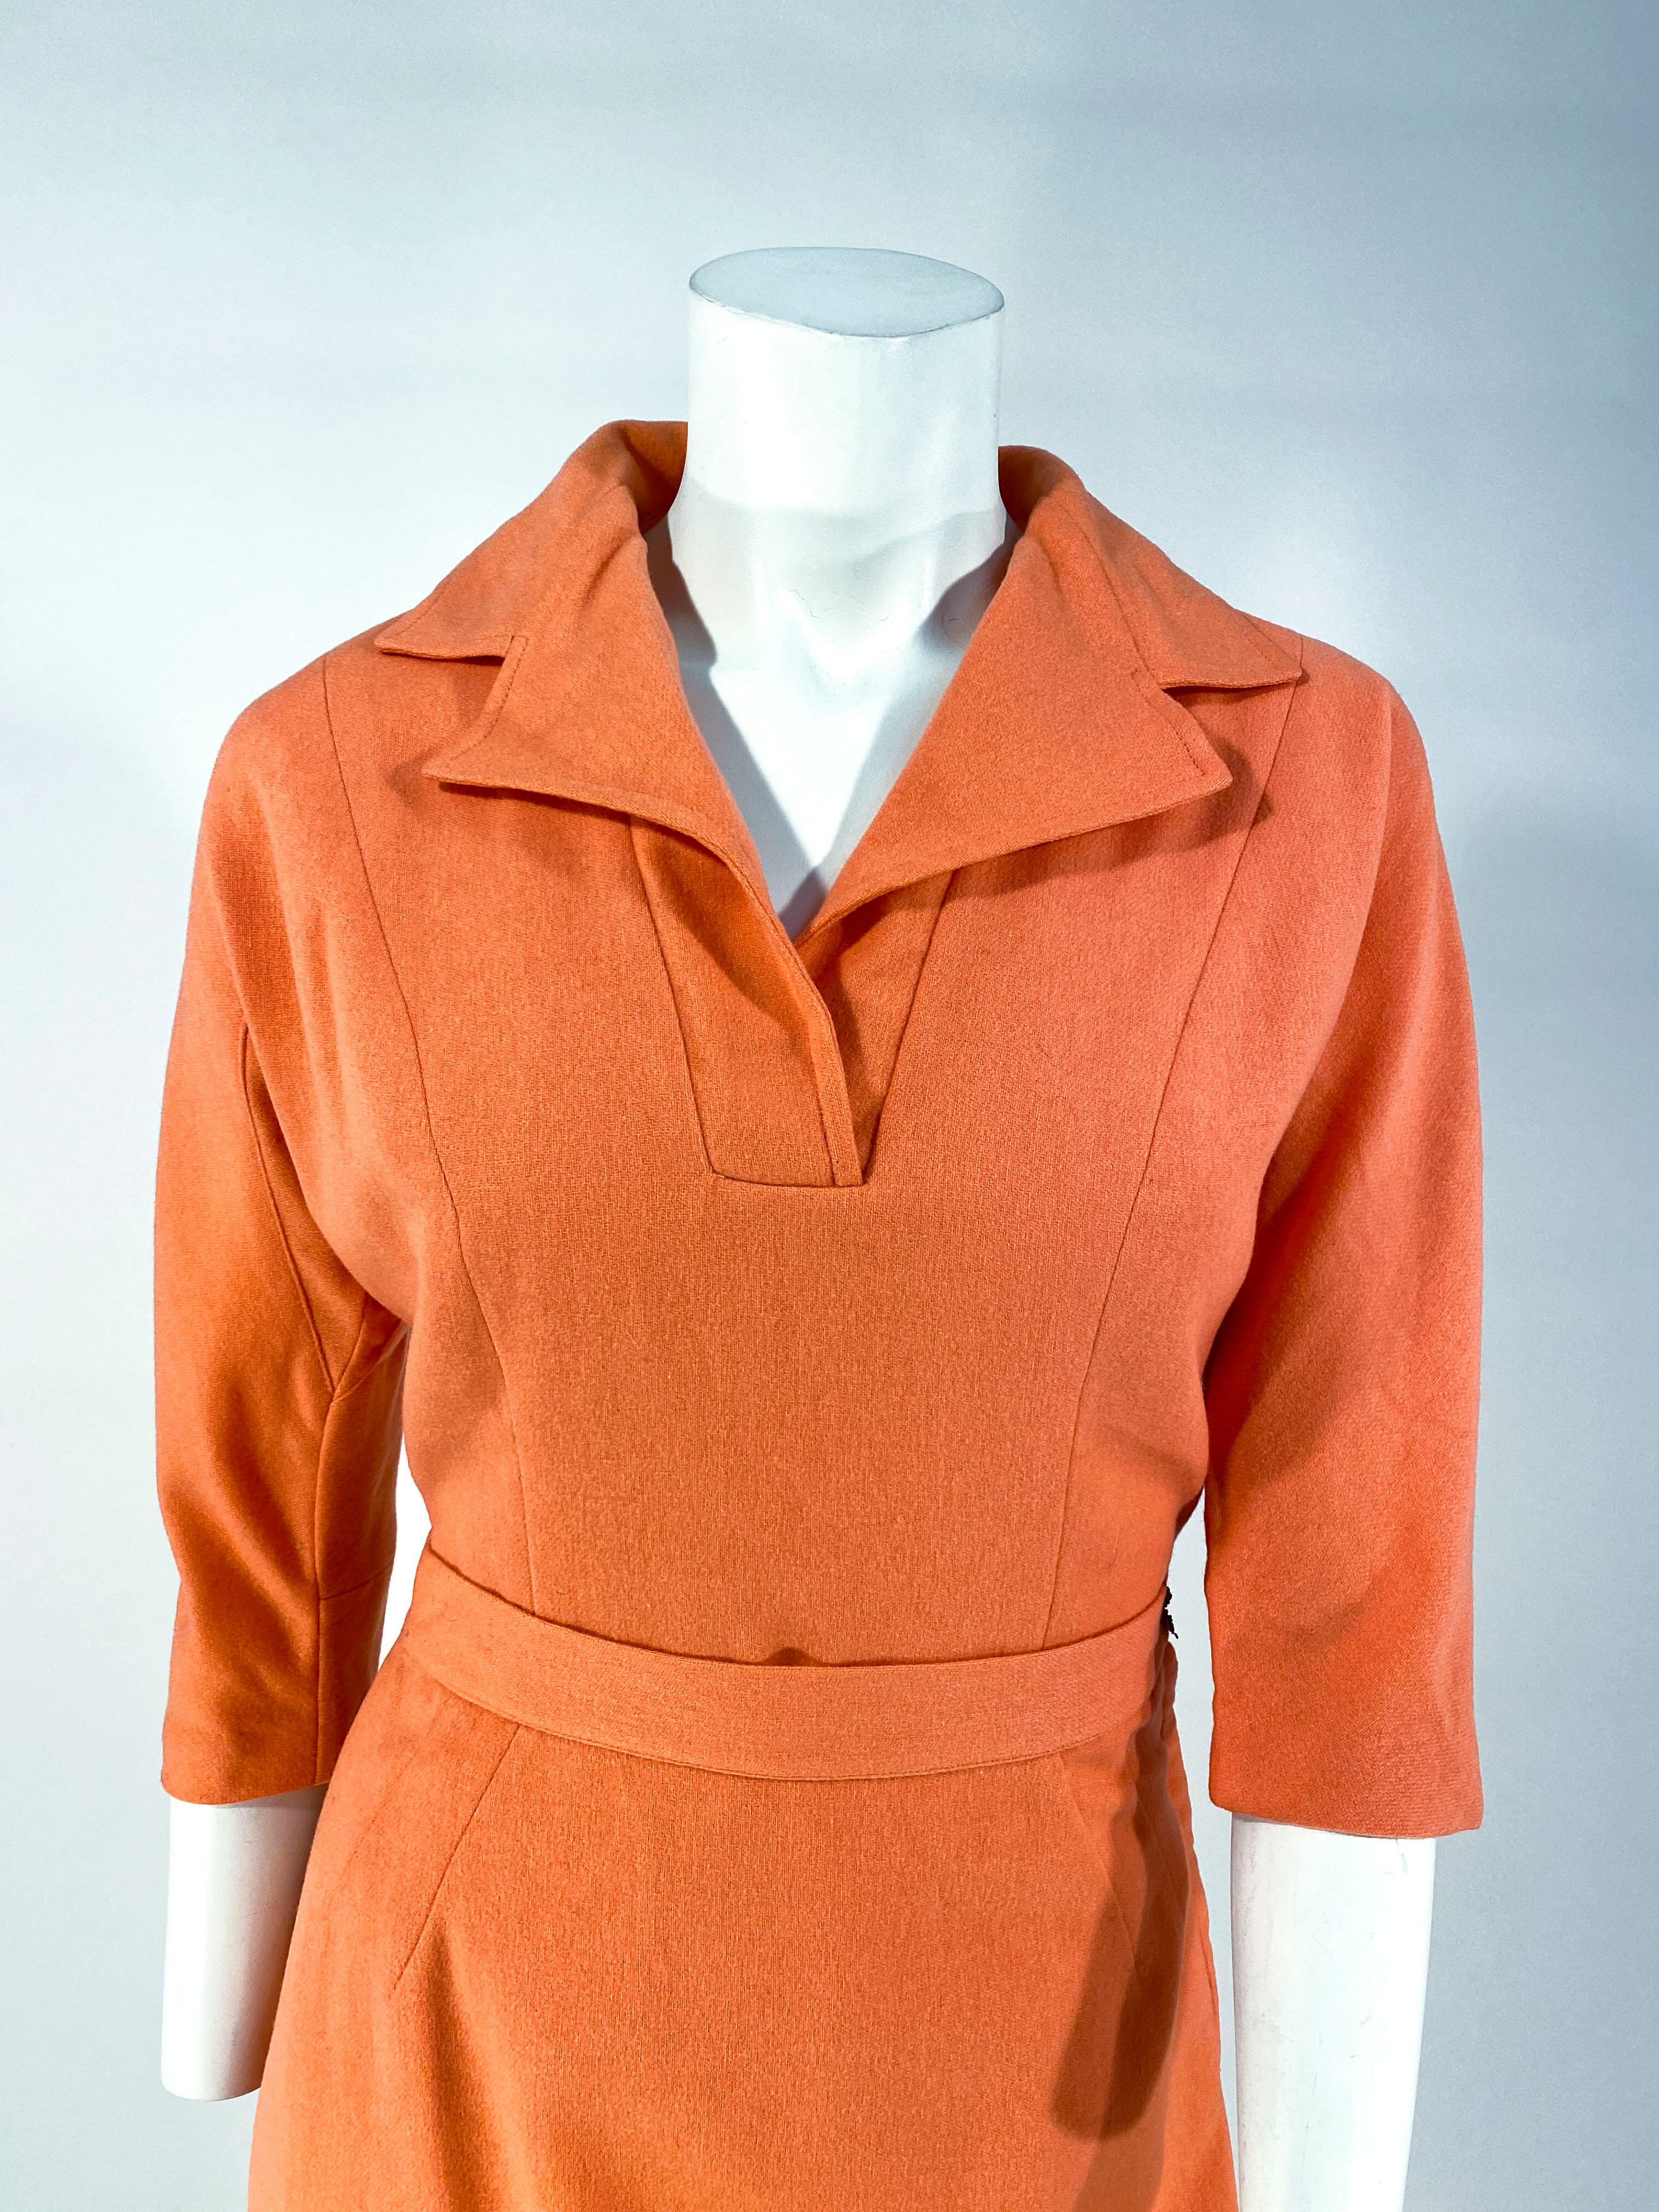 1950s coral colored light wool blouse and skirt set. This Day suit is fully lined with three-fourths length tapered sleeves with underarm gusset, a lapeled collar, and a metal side zipper closure. The pencil skirt is knee-length with a metal side